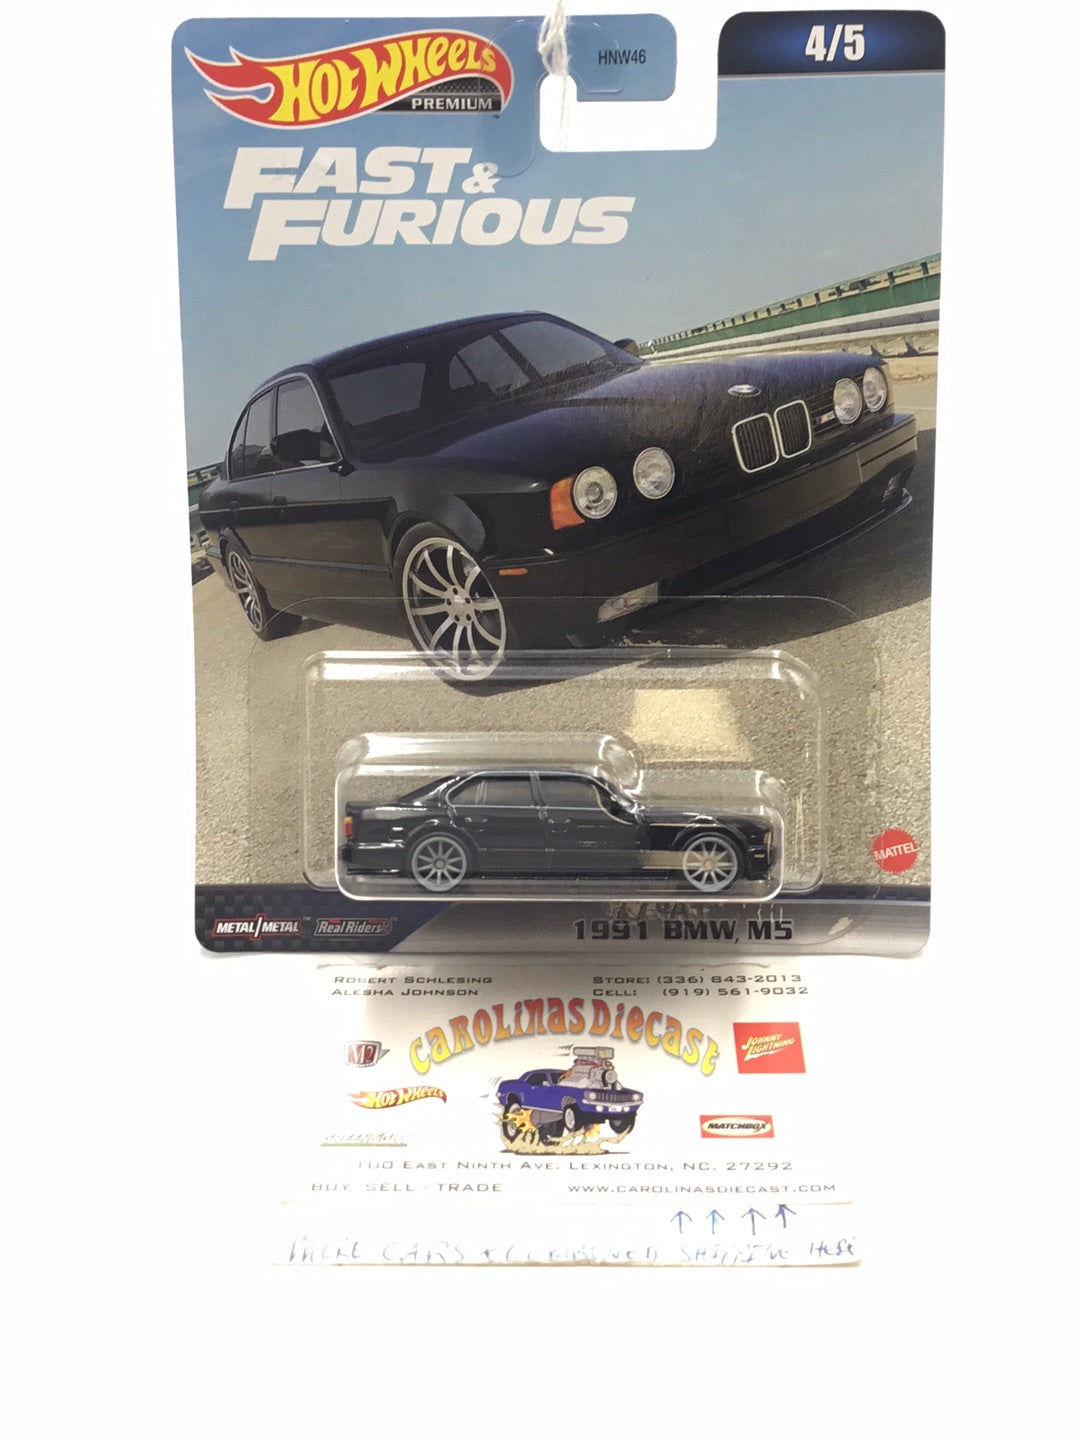 2023 Hot wheels fast and furious 1991 BMW M5 #4 249C